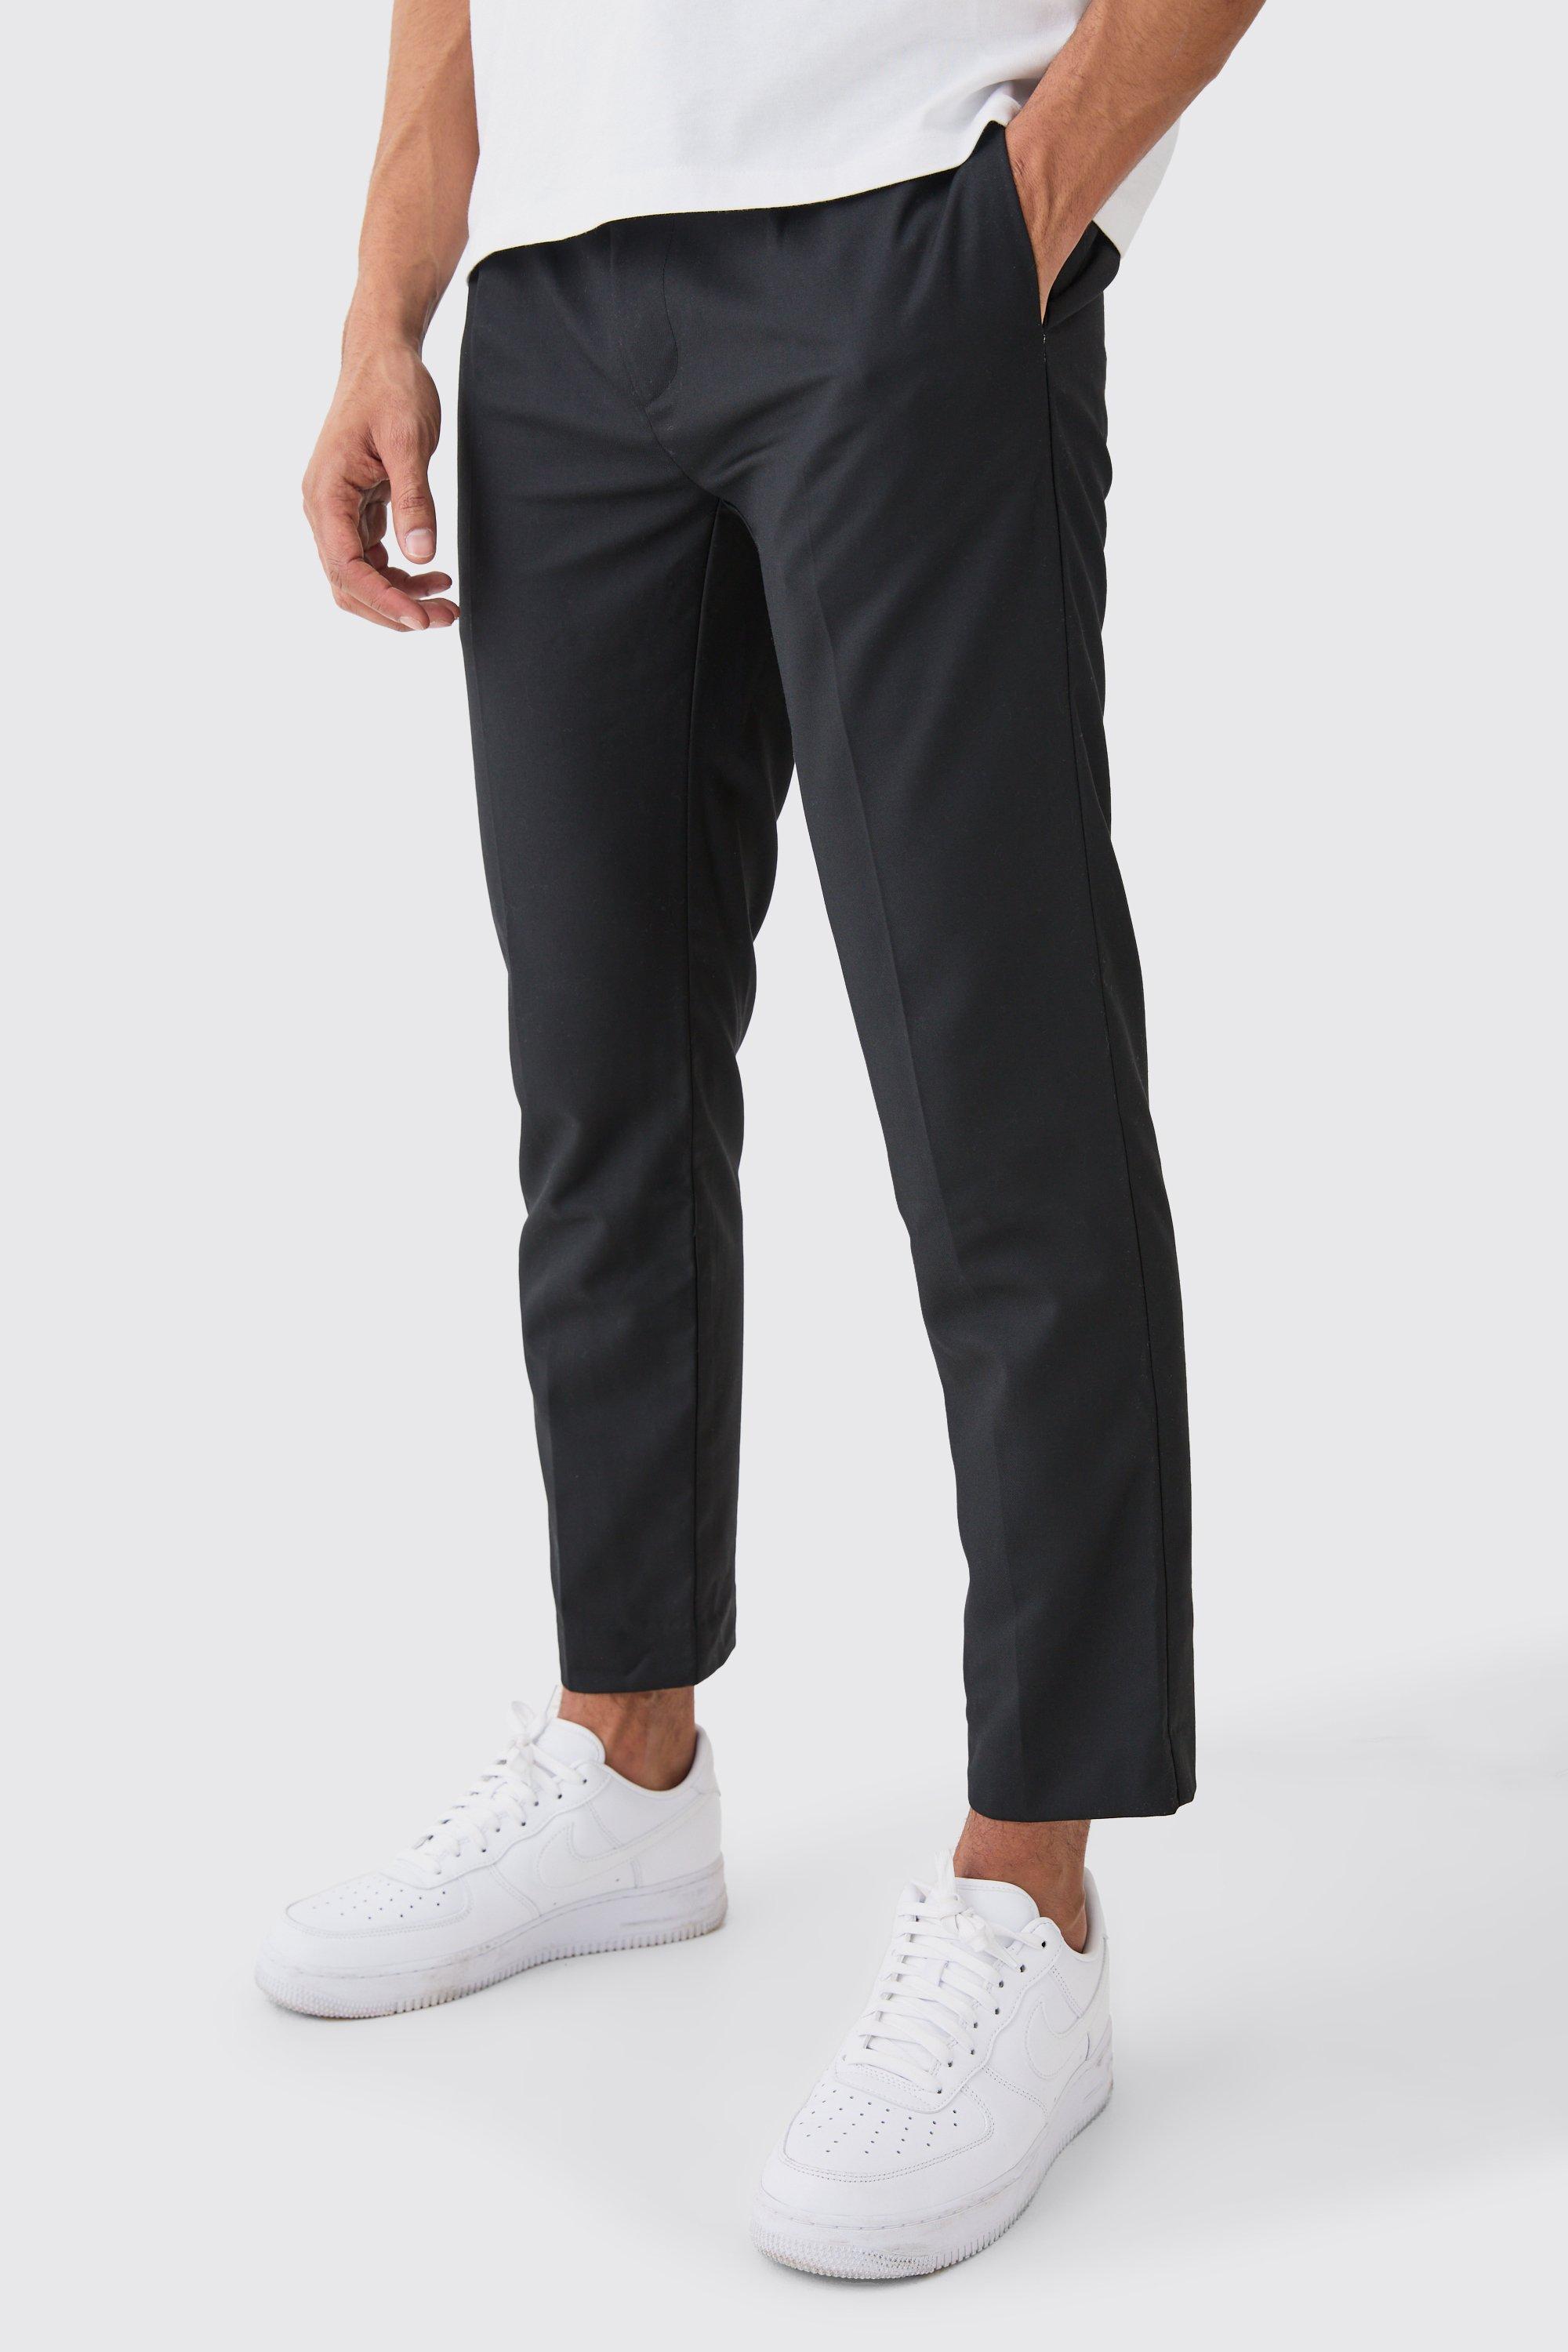 Mens Black Belted Slim Fit Tailored Trousers, Black